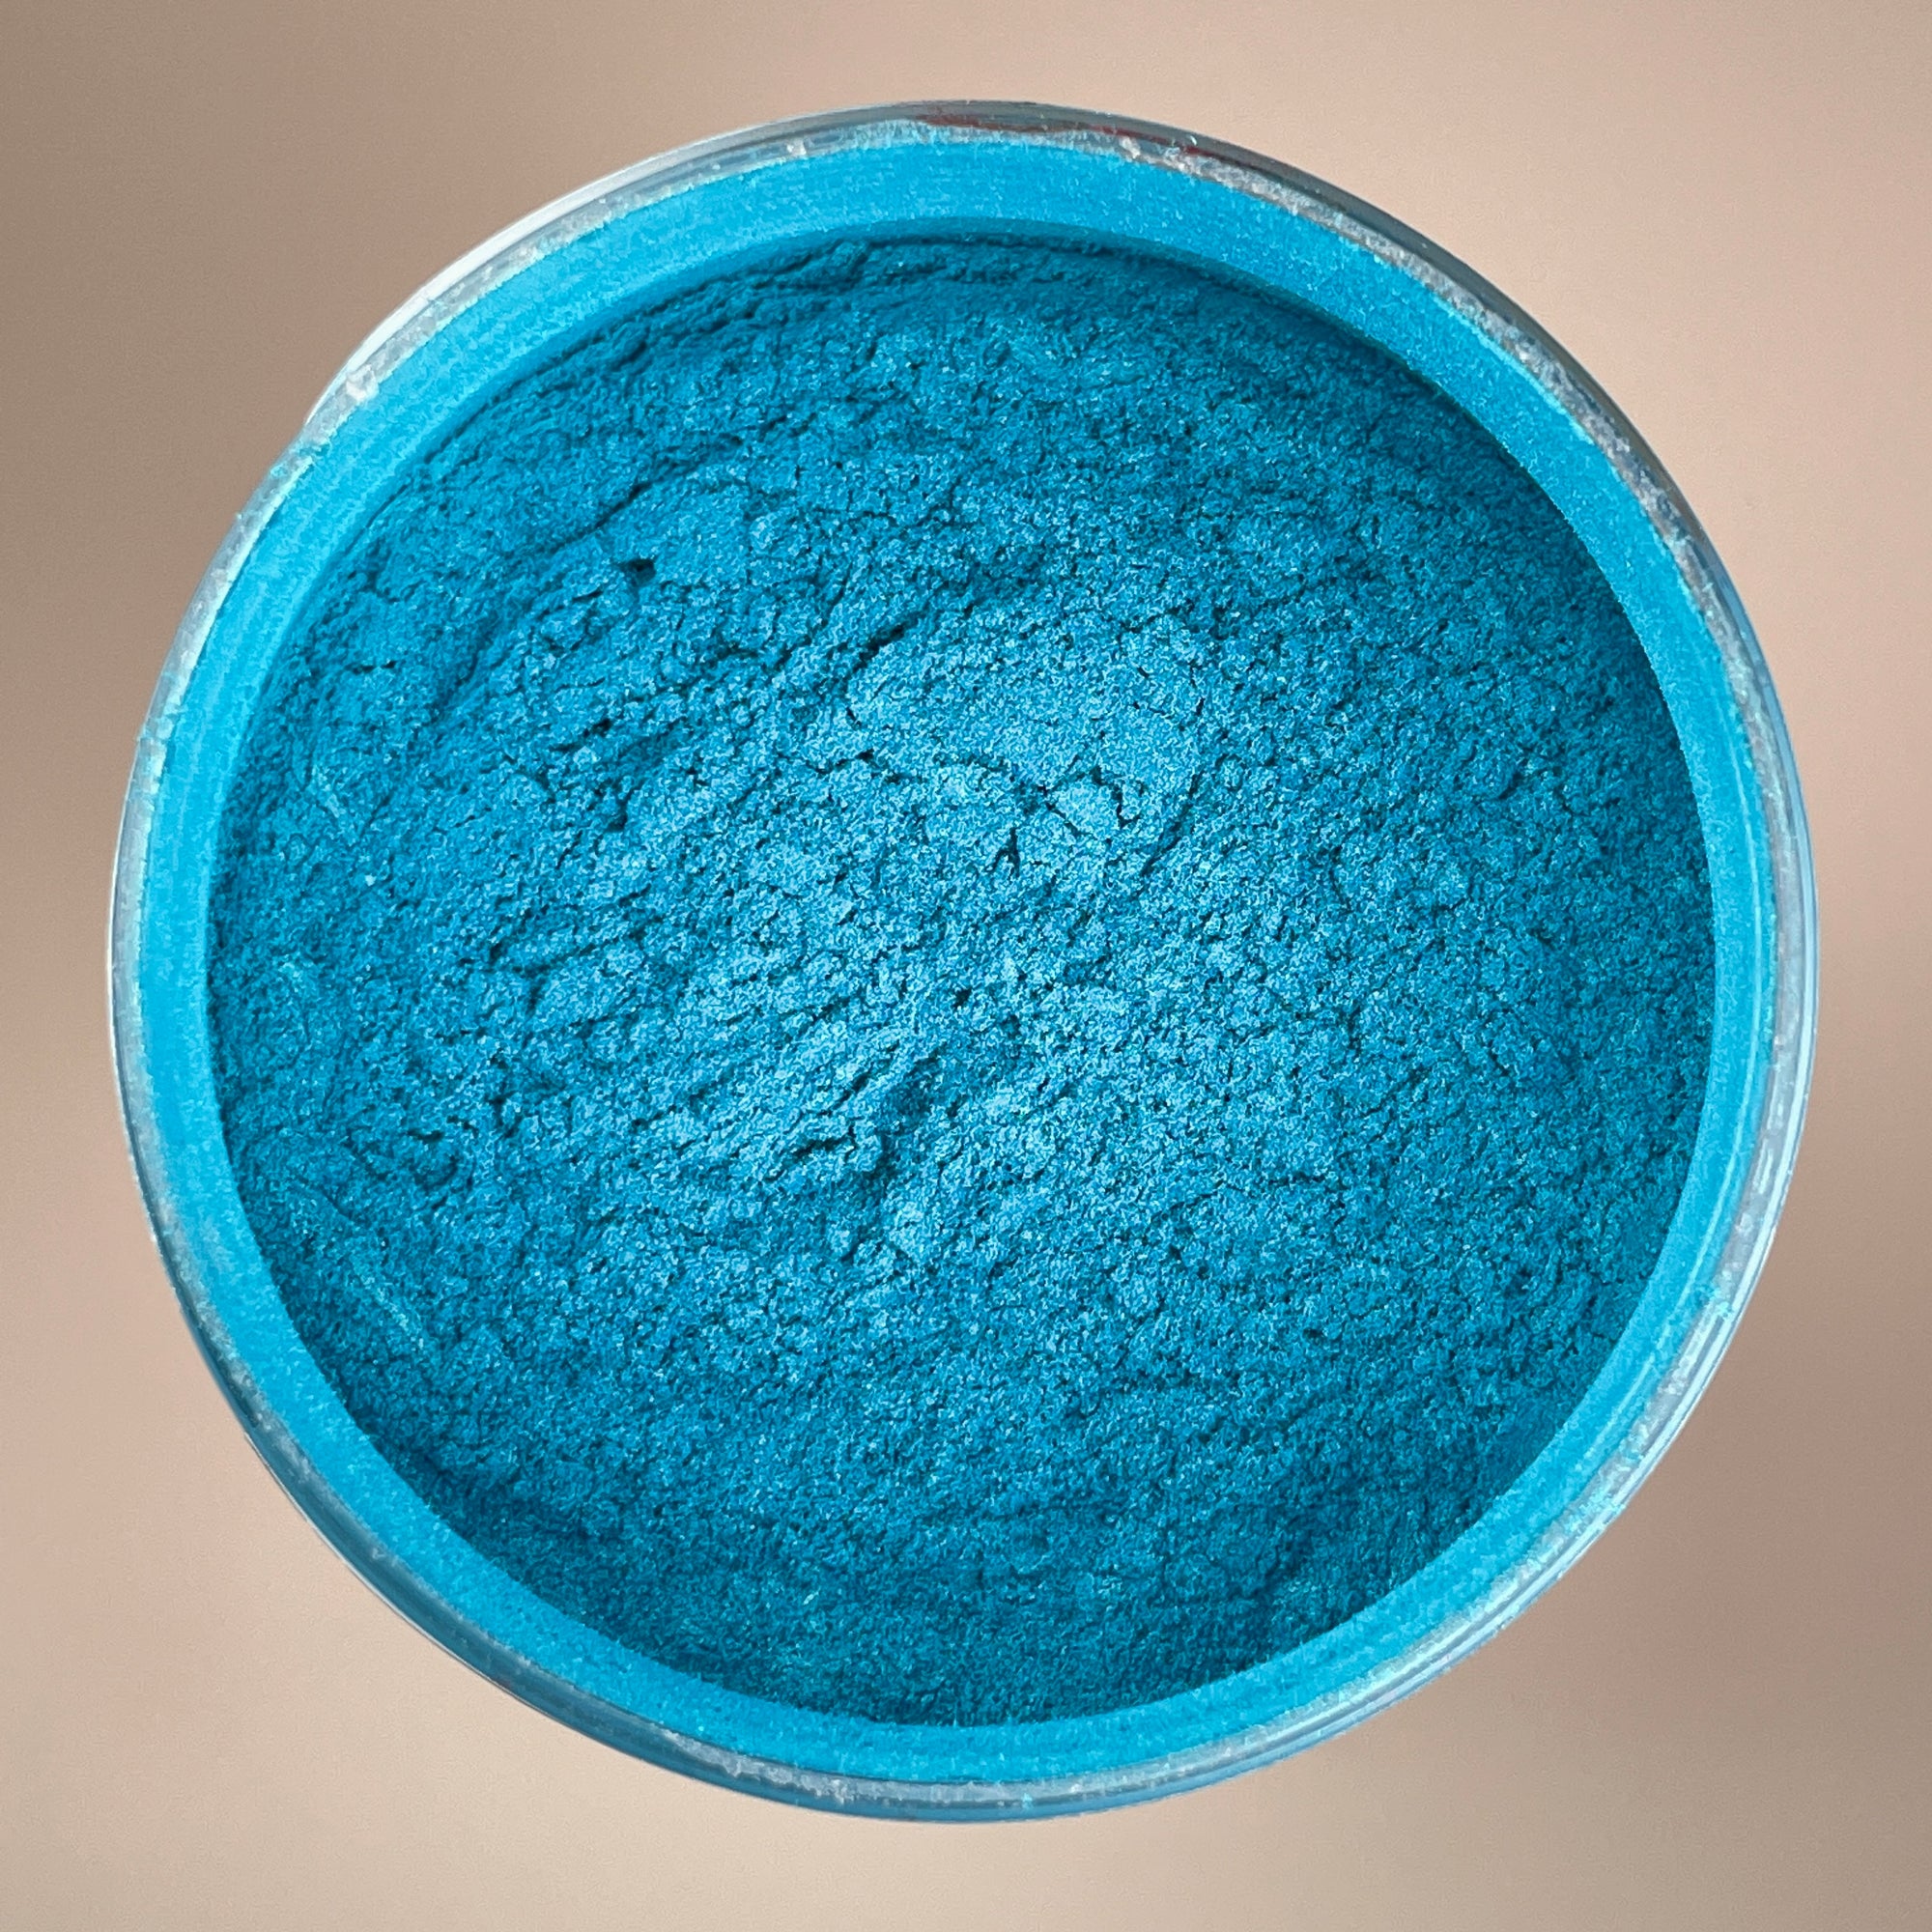 vibrant blue and green Glimmering mica powder for nail art